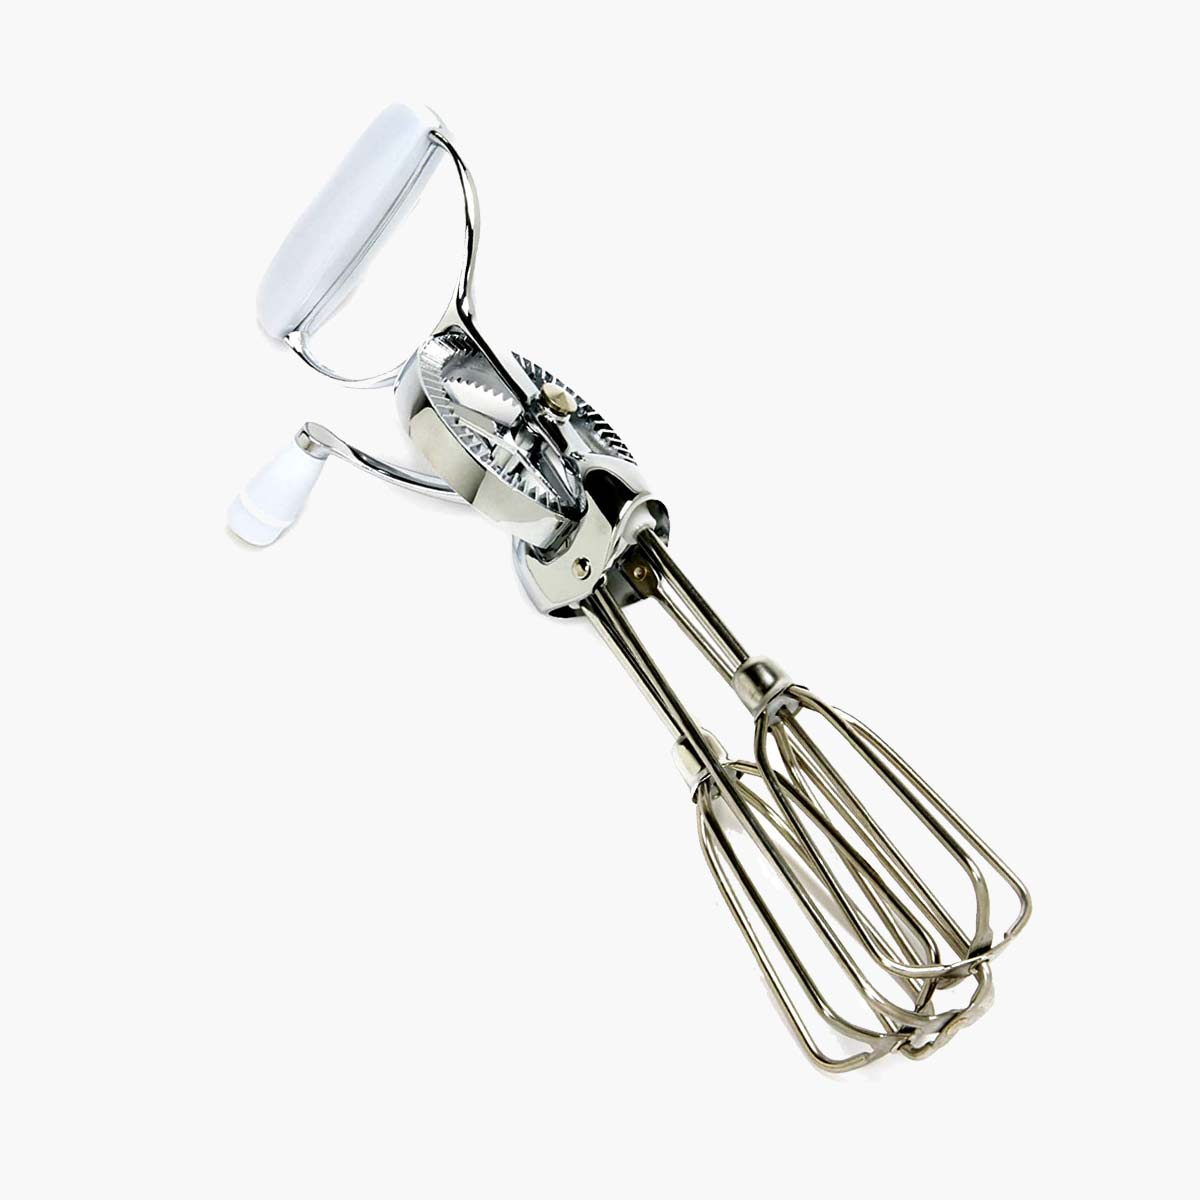 A Norpro rotary egg beater with white handles.